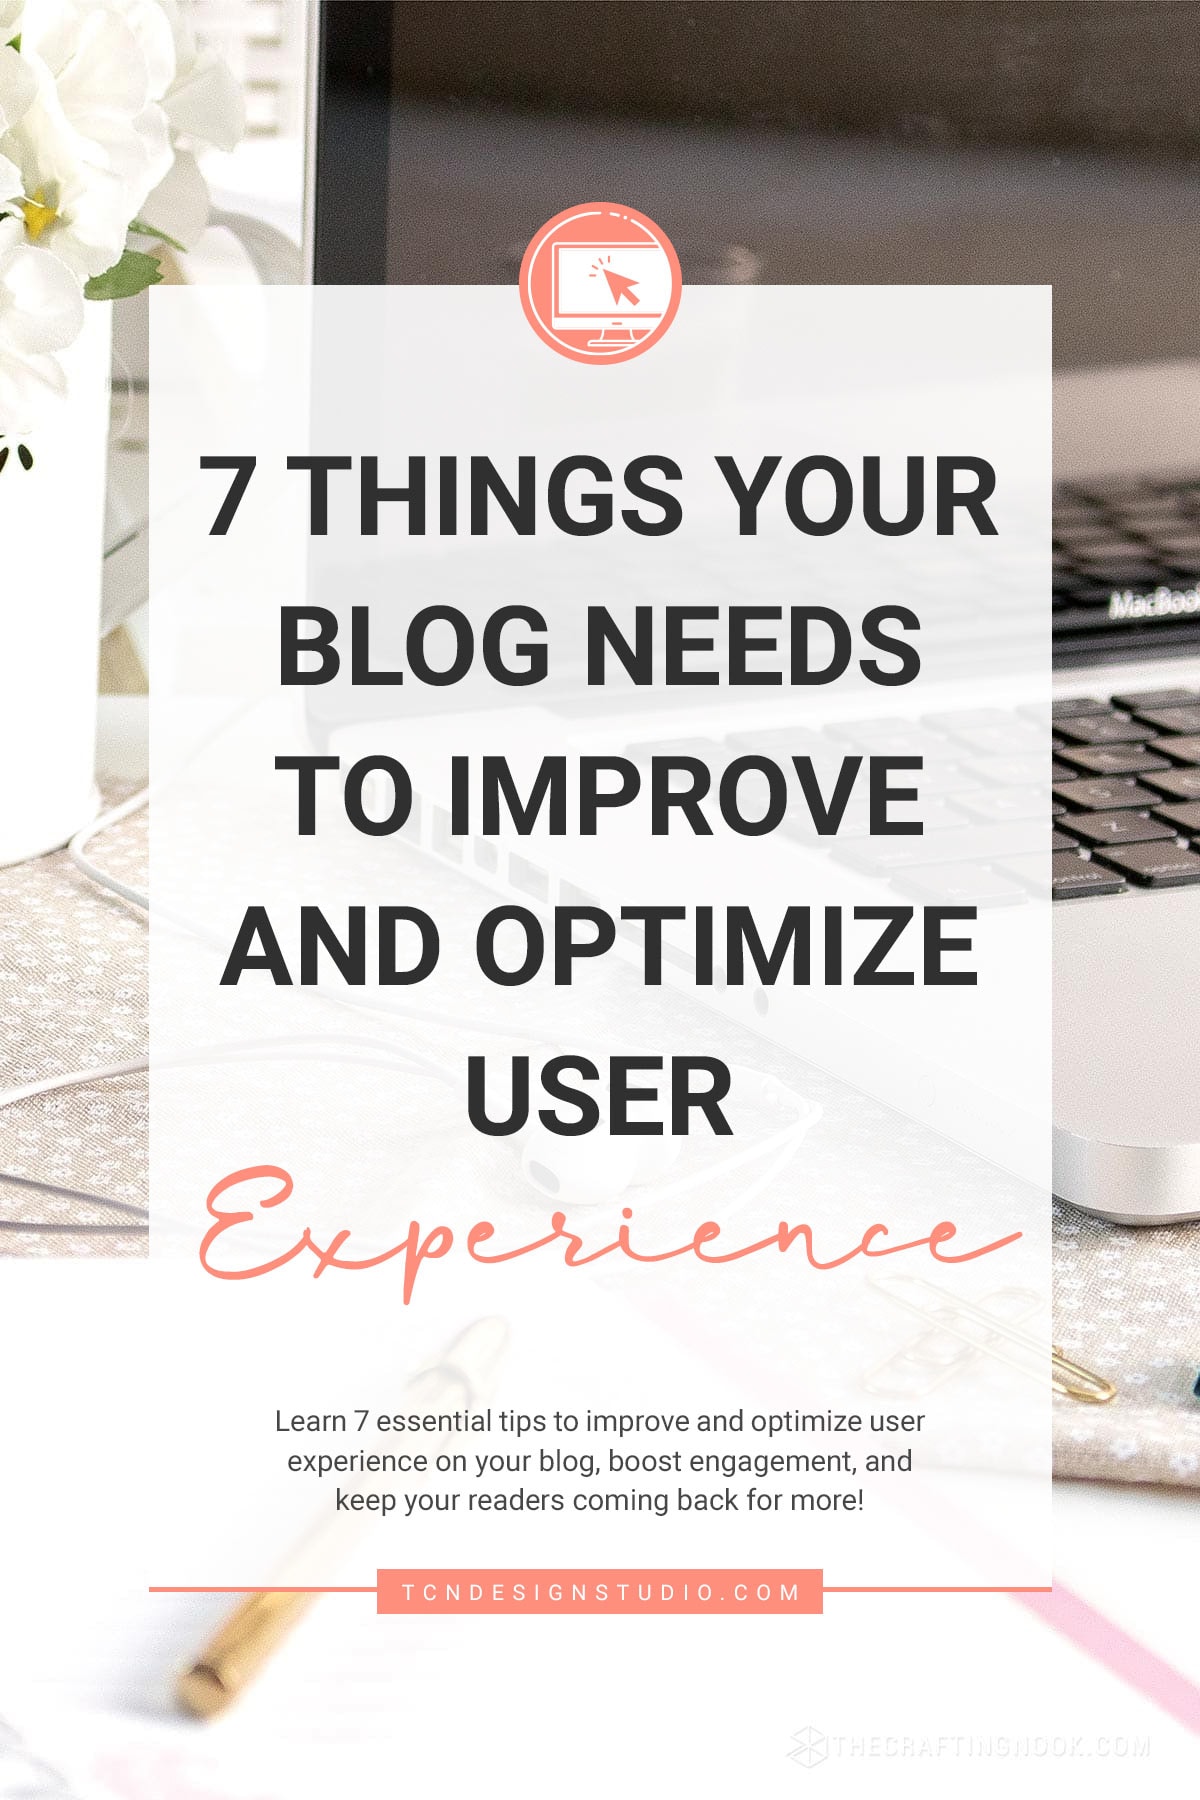 7 Things Your Blog Needs to Improve and Optimize User Experience. Image for pinterest with photo and title overlay